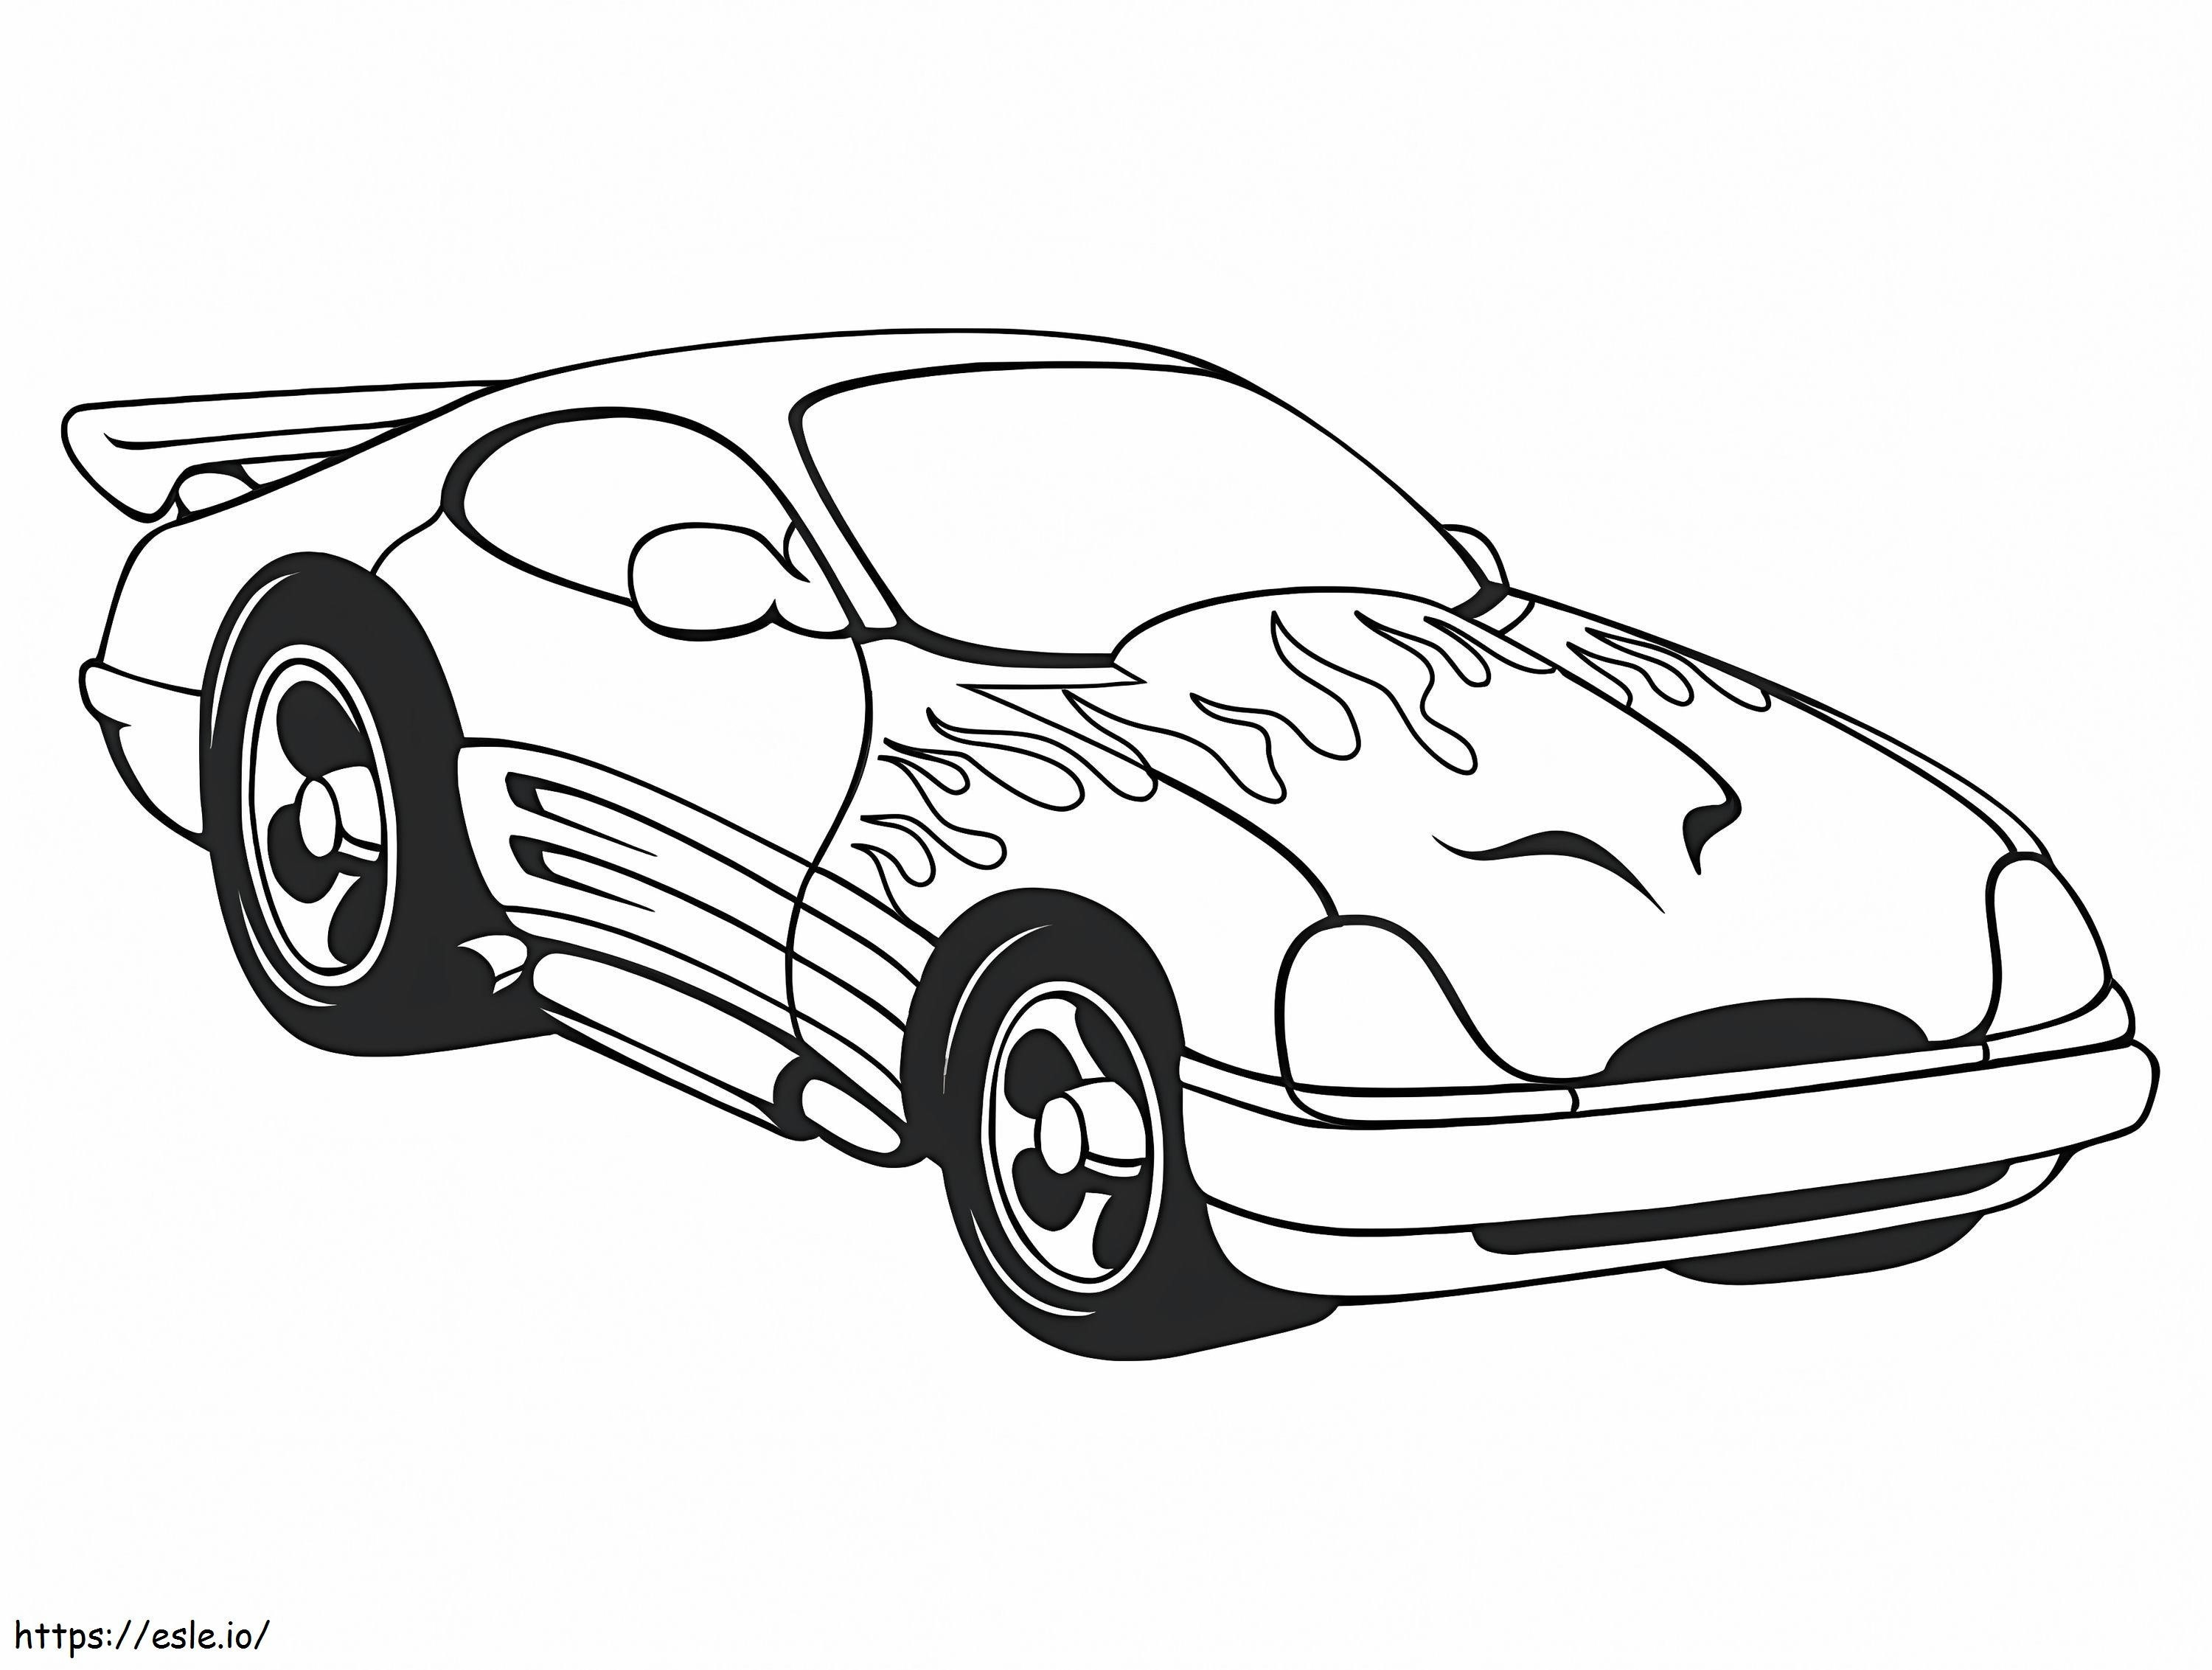 Awesome Car coloring page